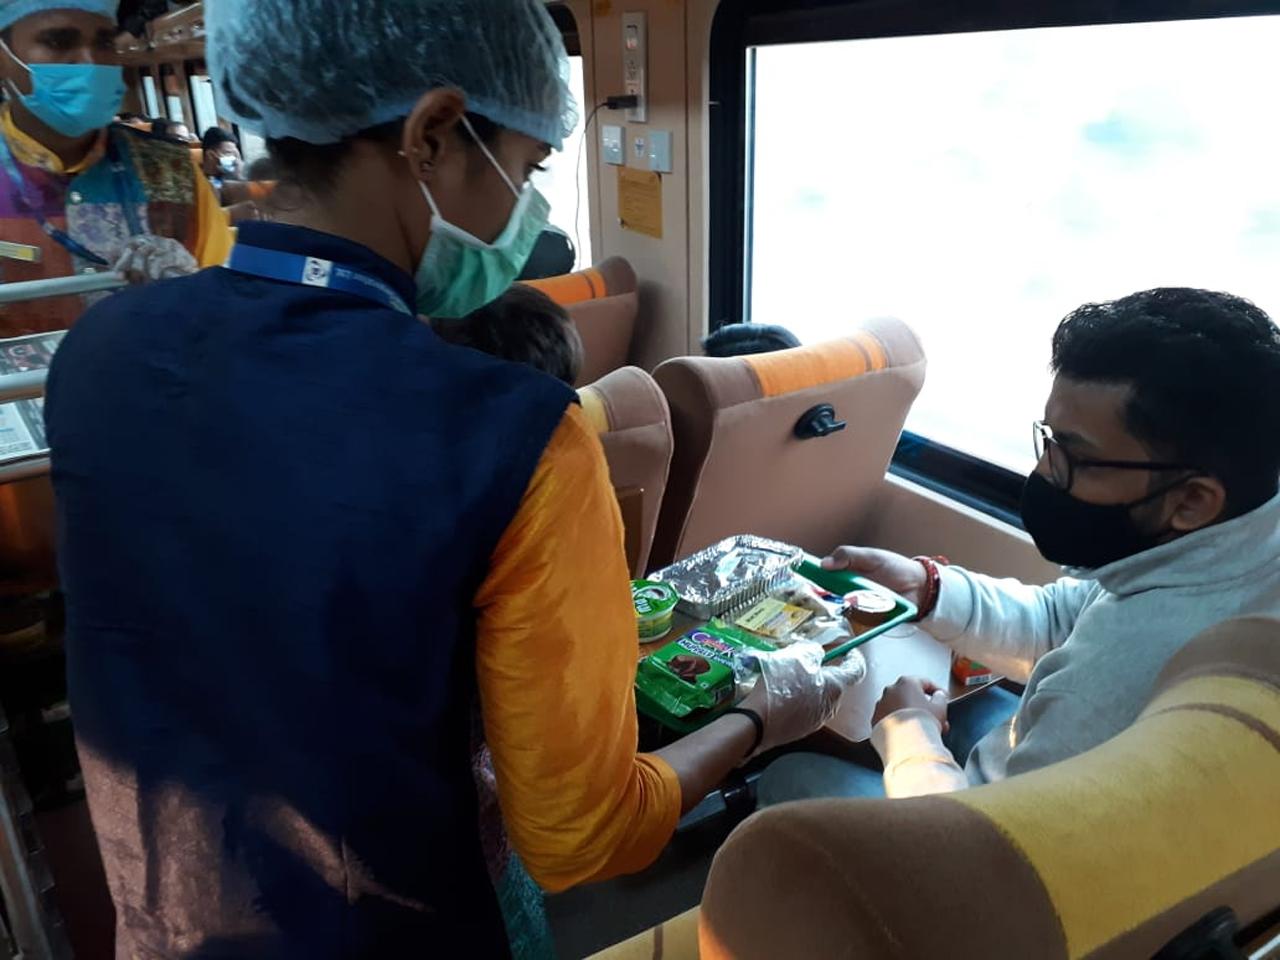 After being shut for over 10-months, the Mumbai-Ahmedabad Tejas Express was finally up and running as it carried a total of about 1,600 passengers (both ways) on the first day of resuming services with COVID-19 protocols in place.